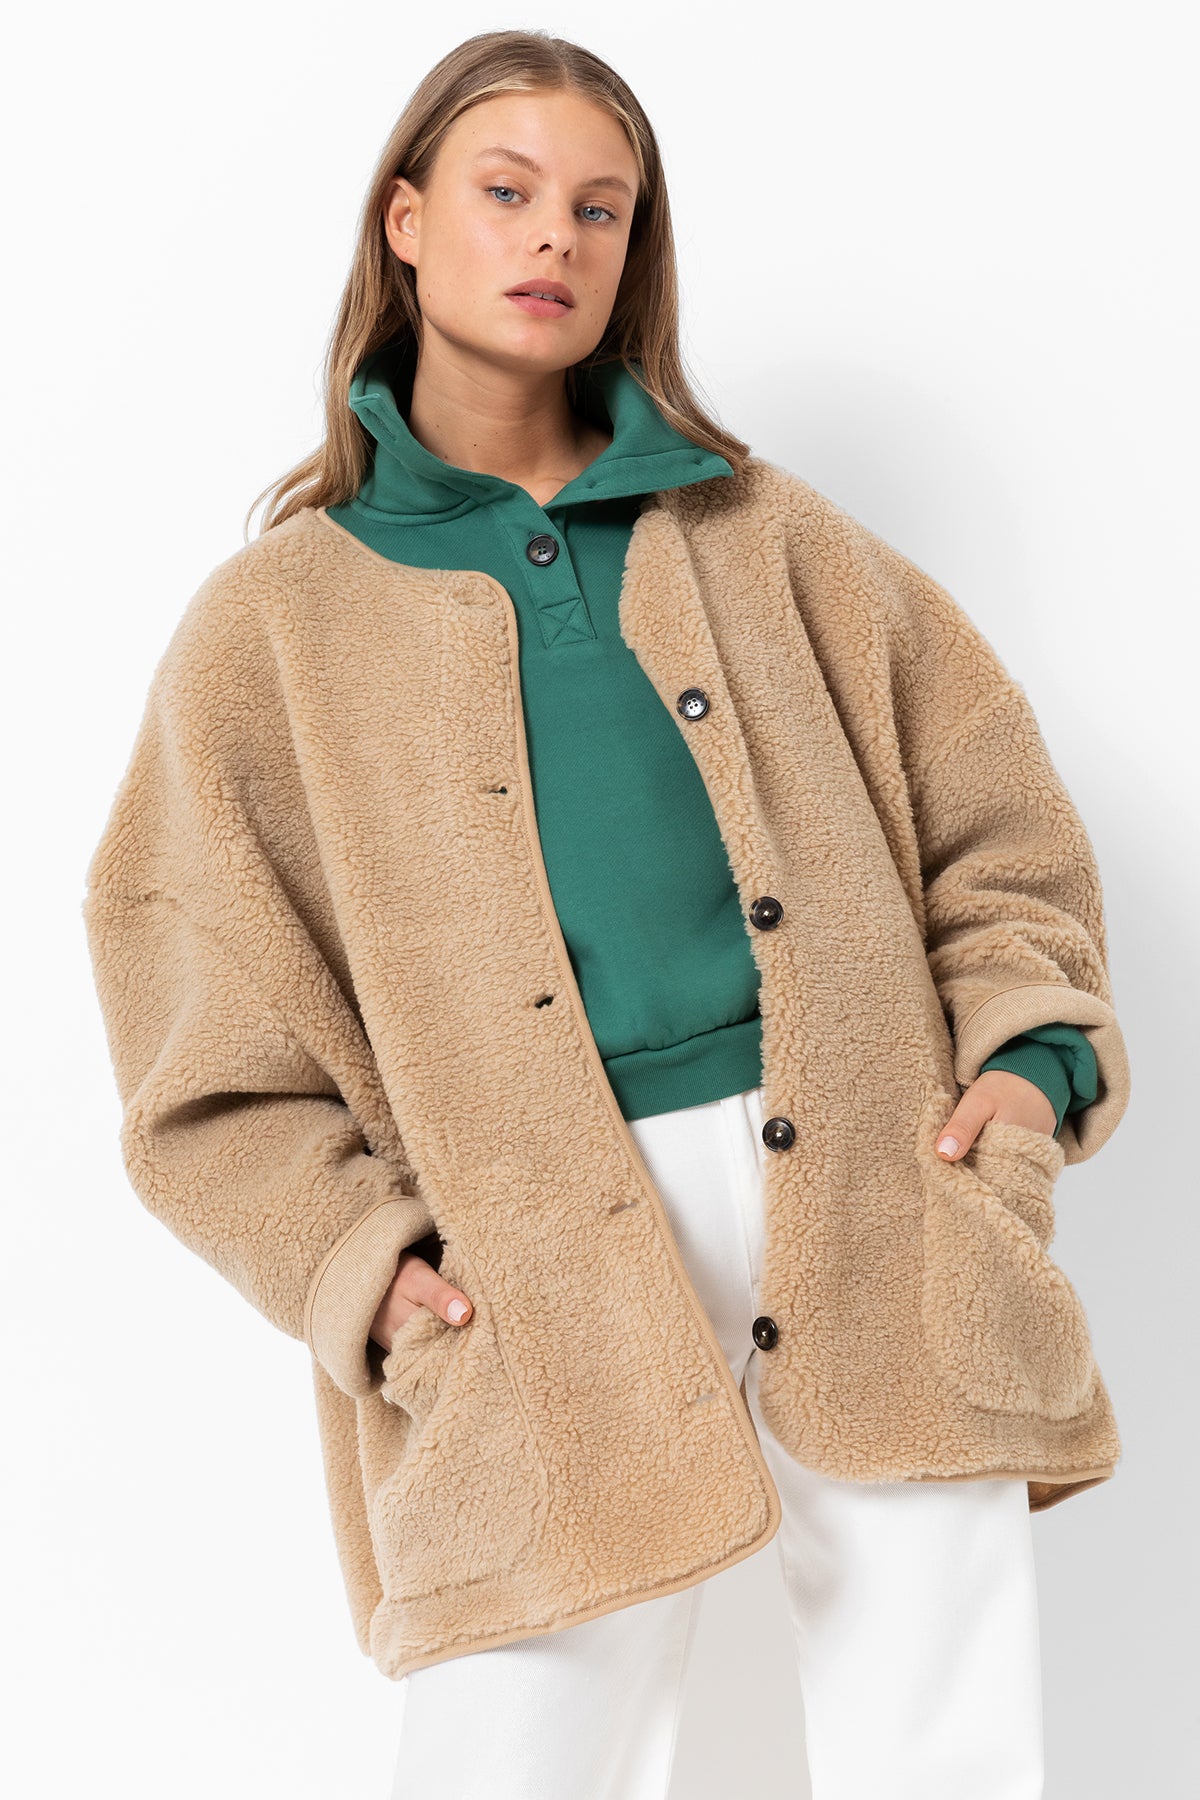 Hannah Teddy Oversized Jacket | Biscuit